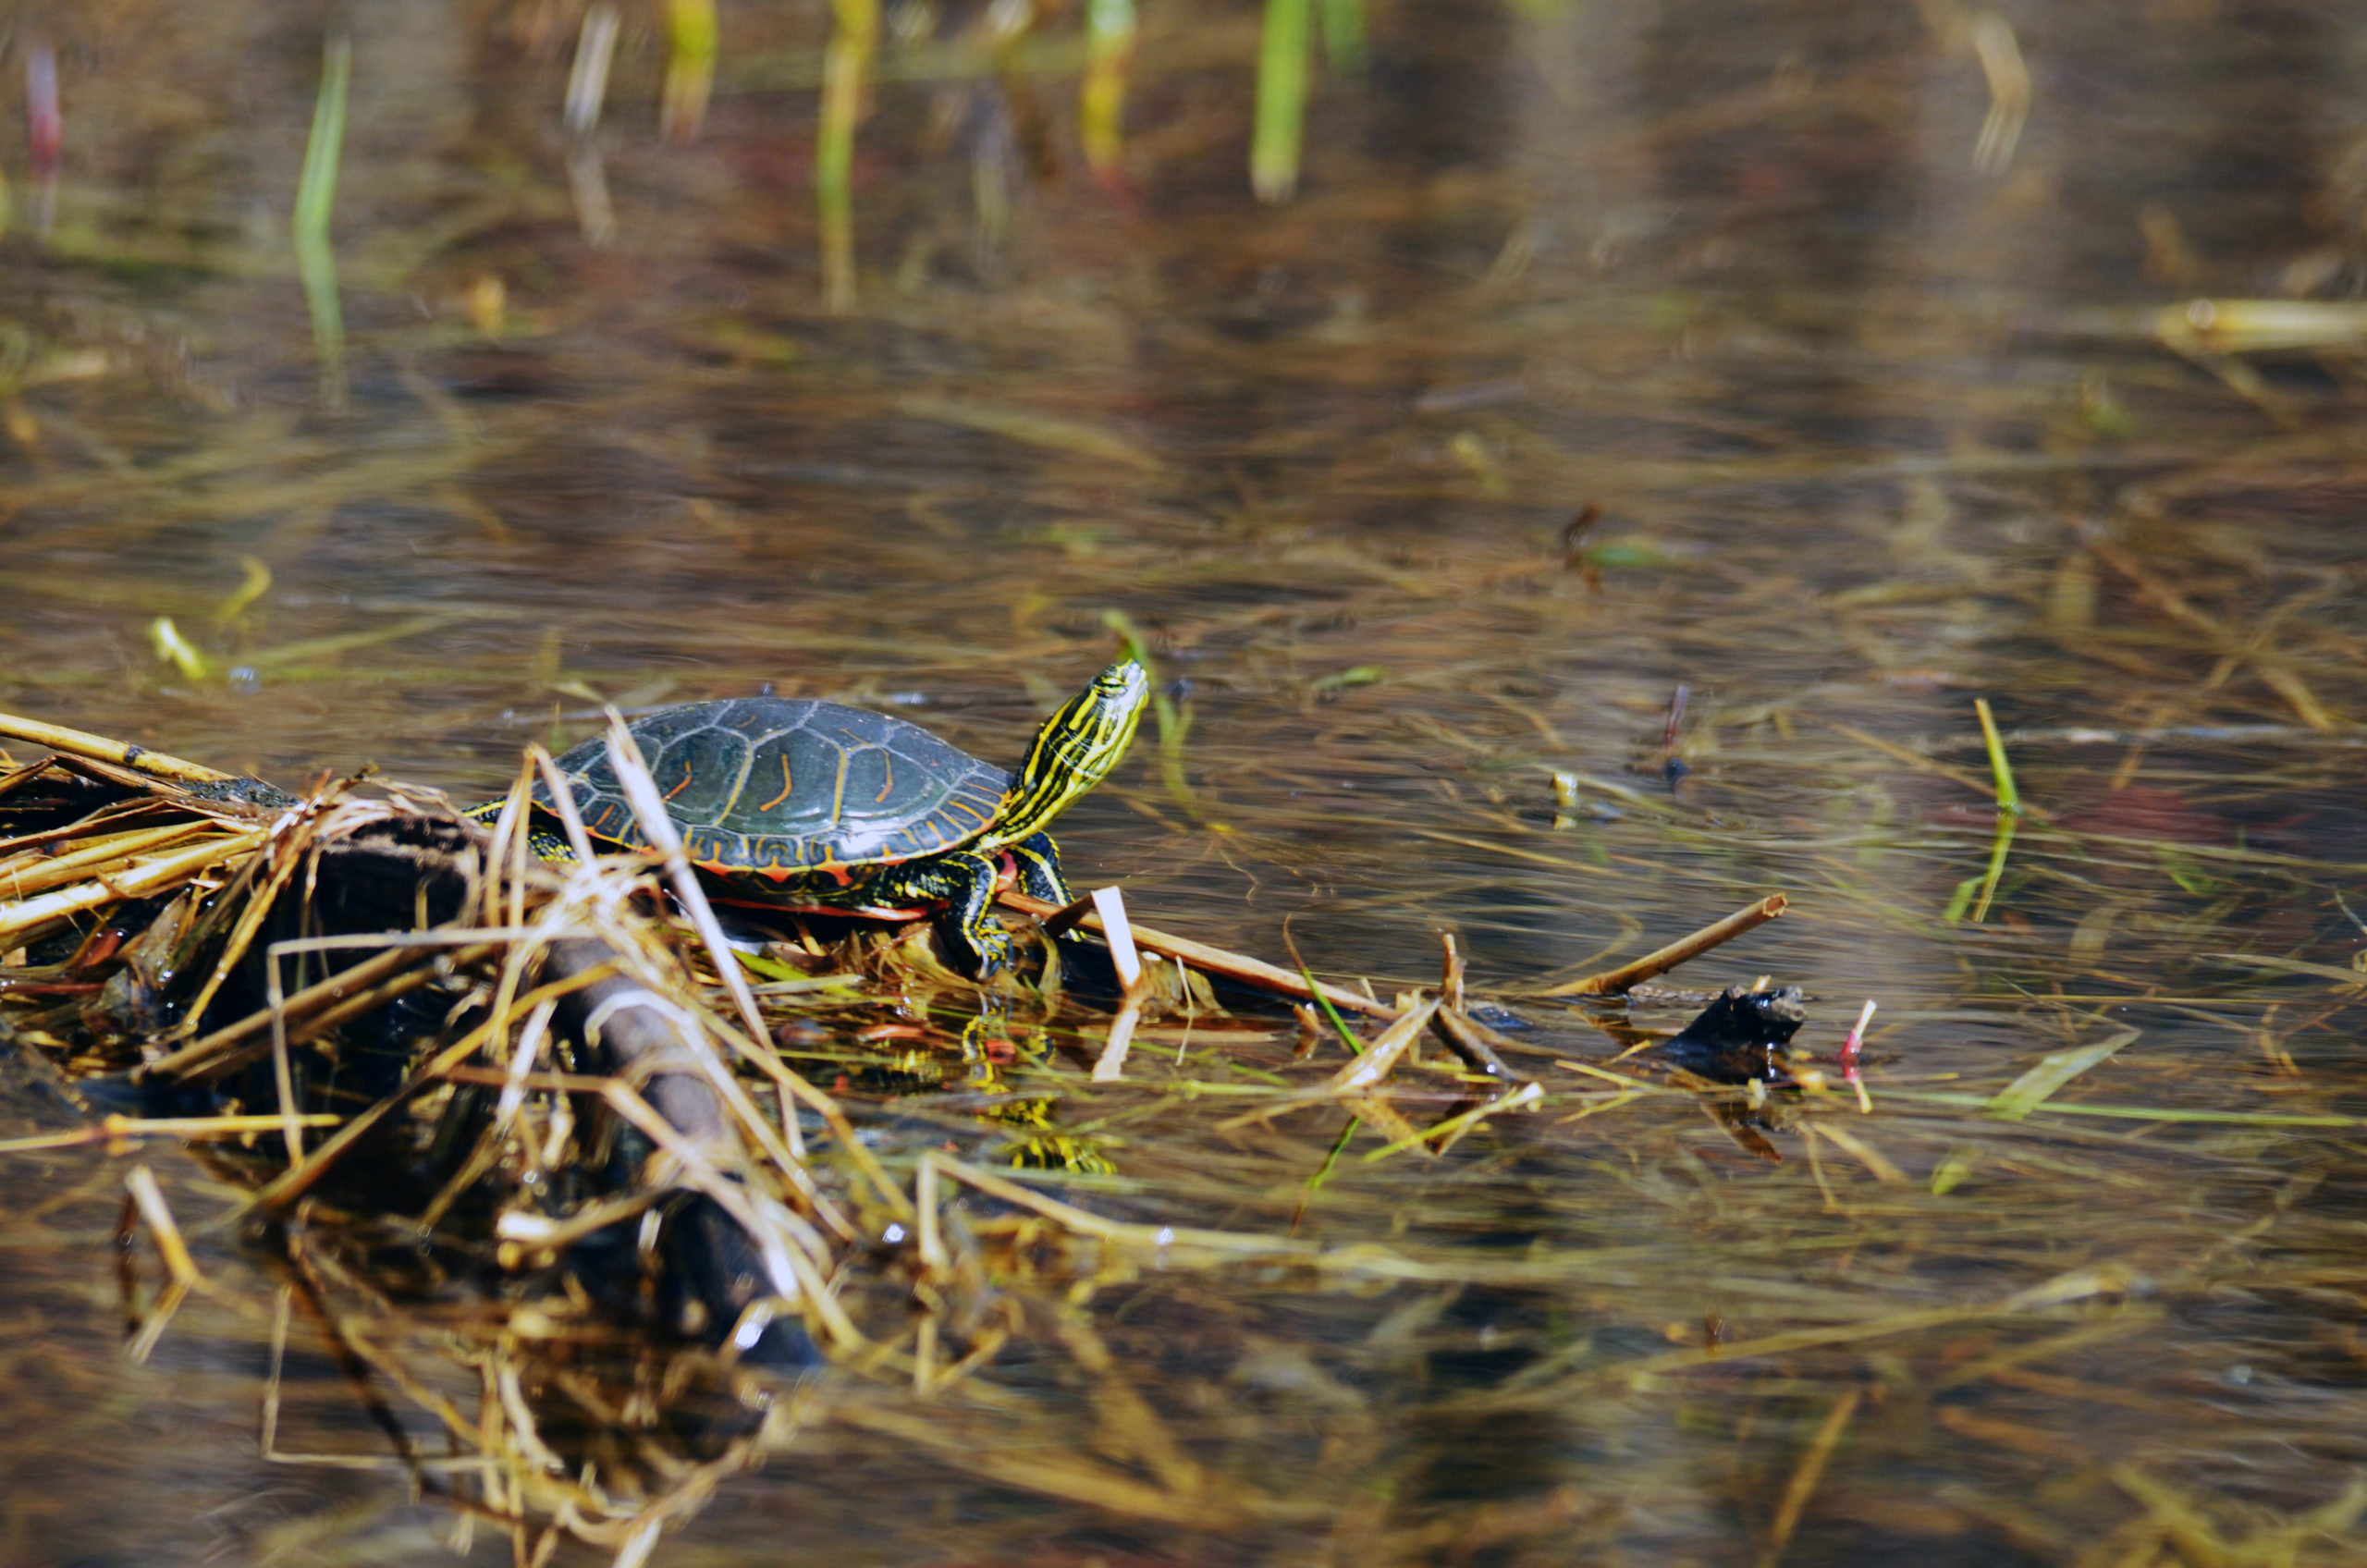 A small turtle surrounded by water takes in some sun atop a clump of grass and mud.